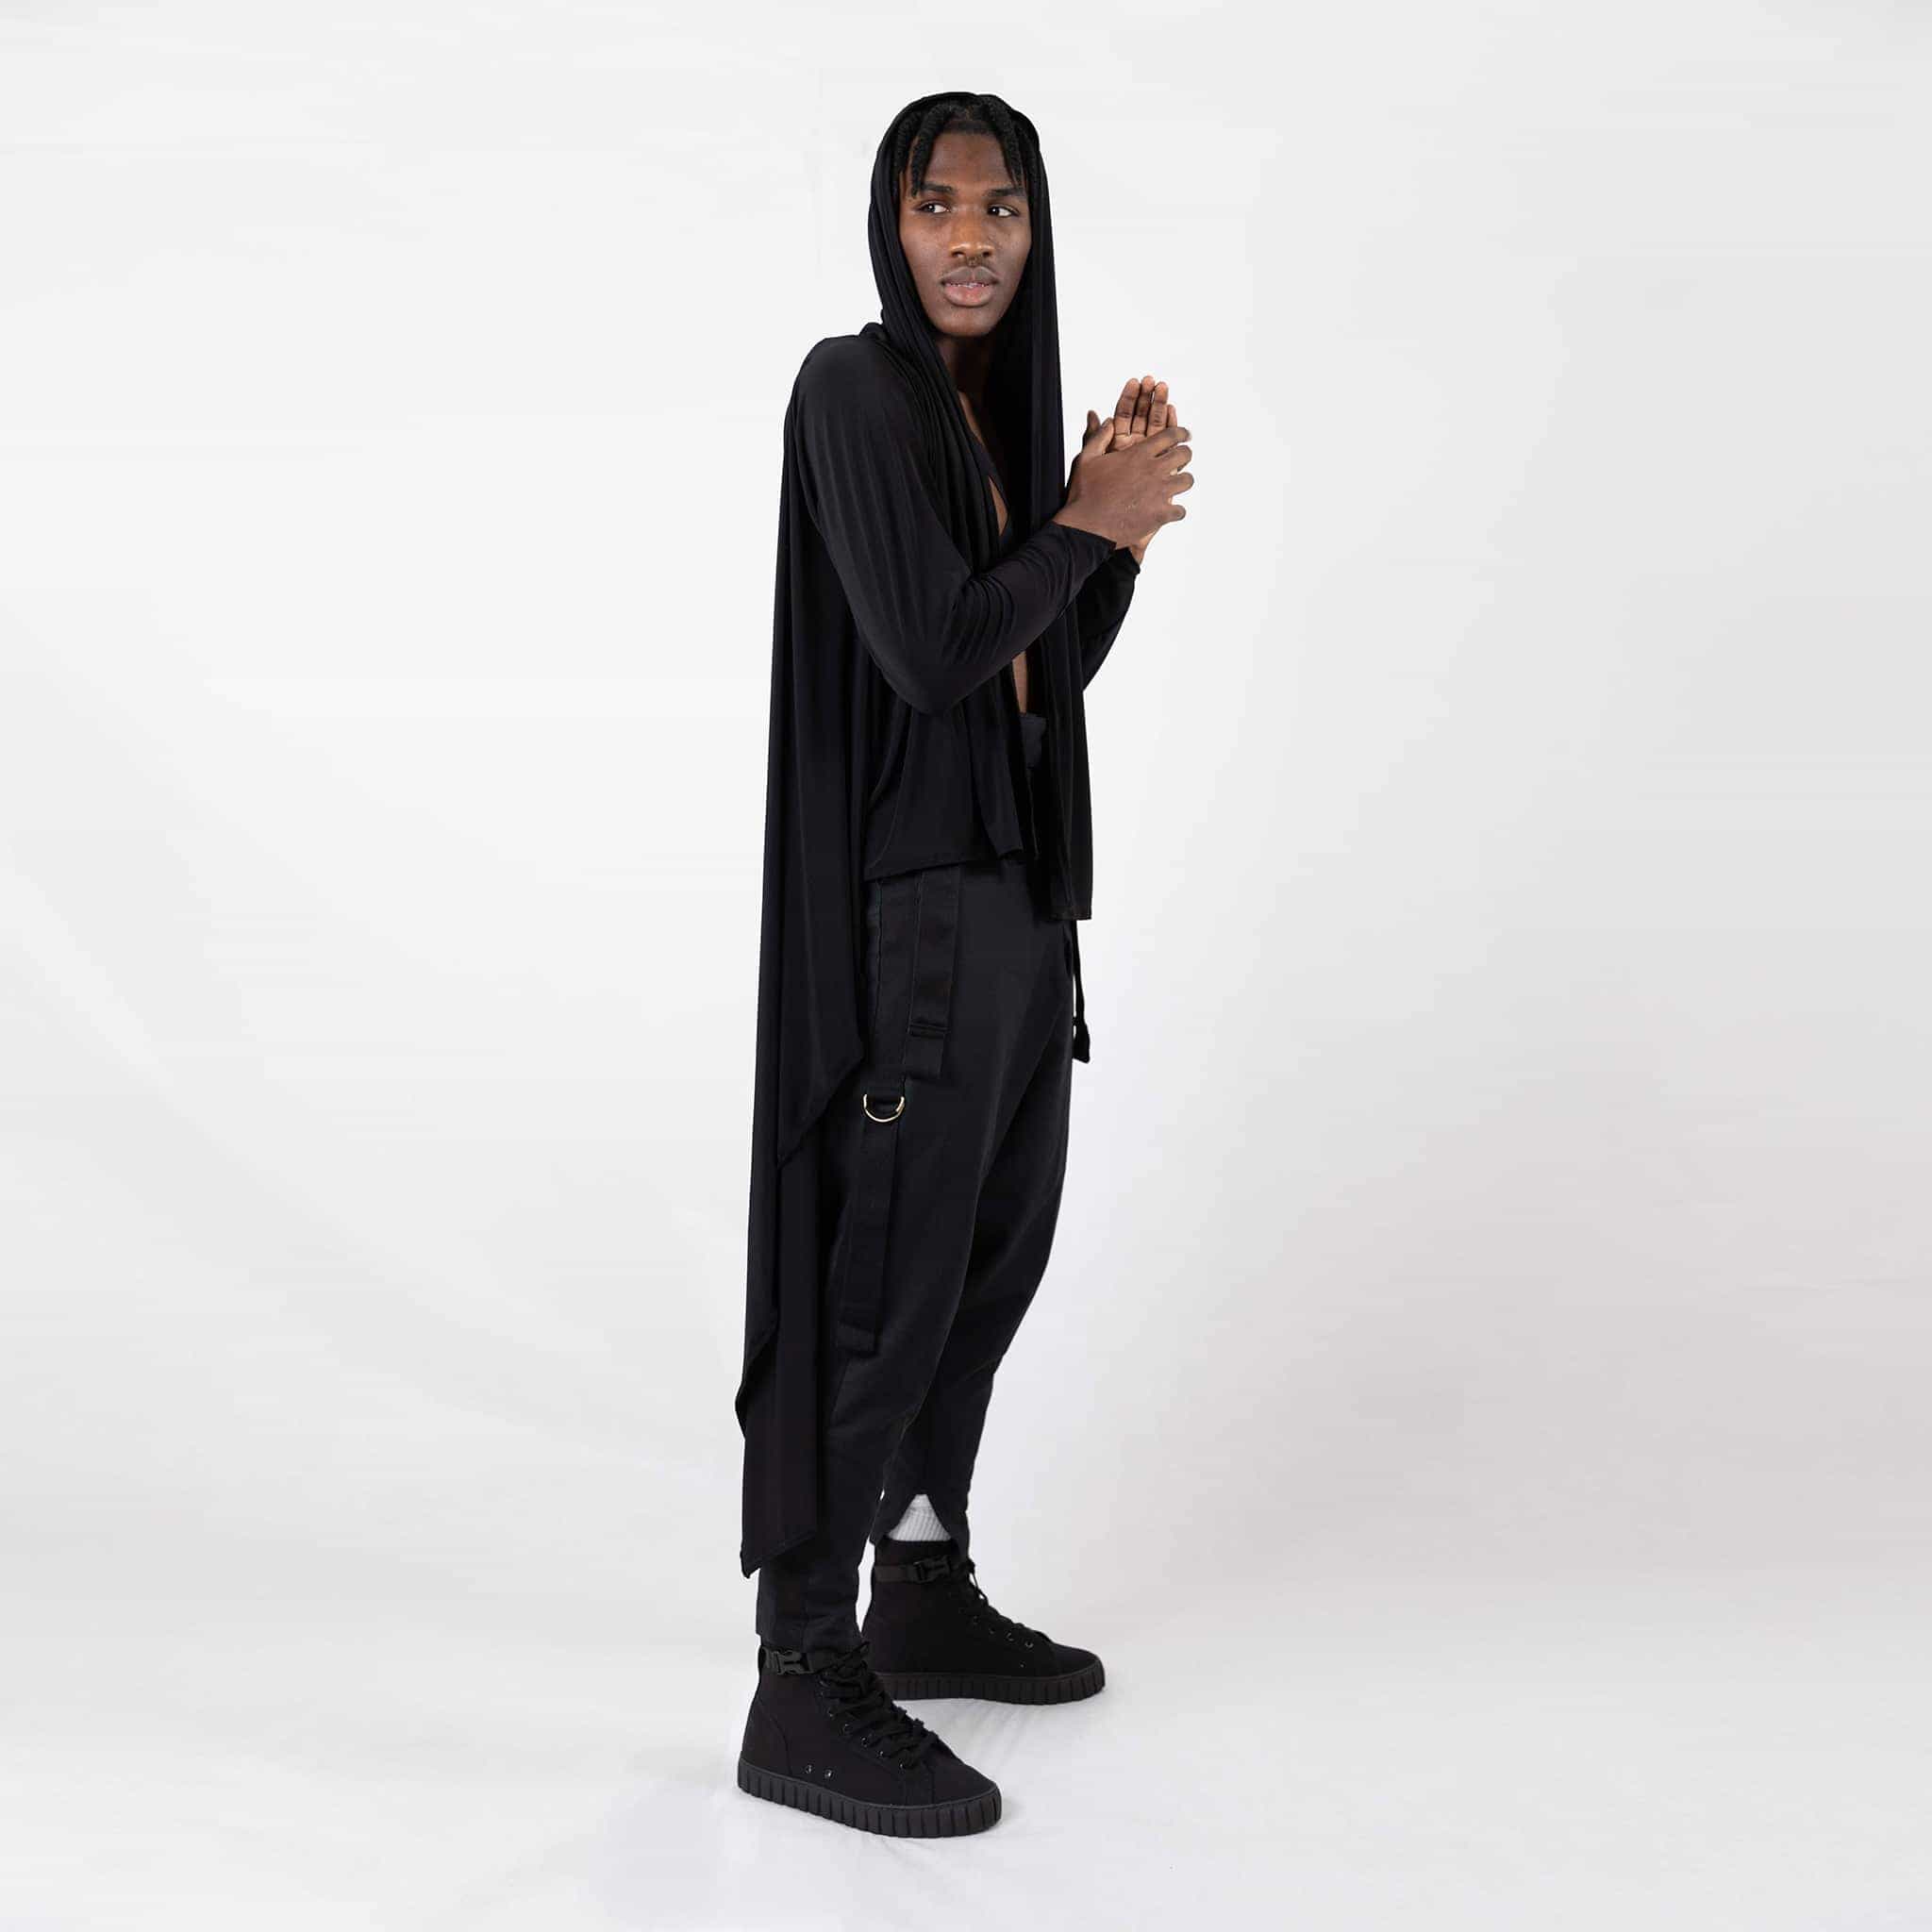   ZERØ London - Side view, black long sleeved zero waste cardigan robe with harness and black trousers designed & made in London